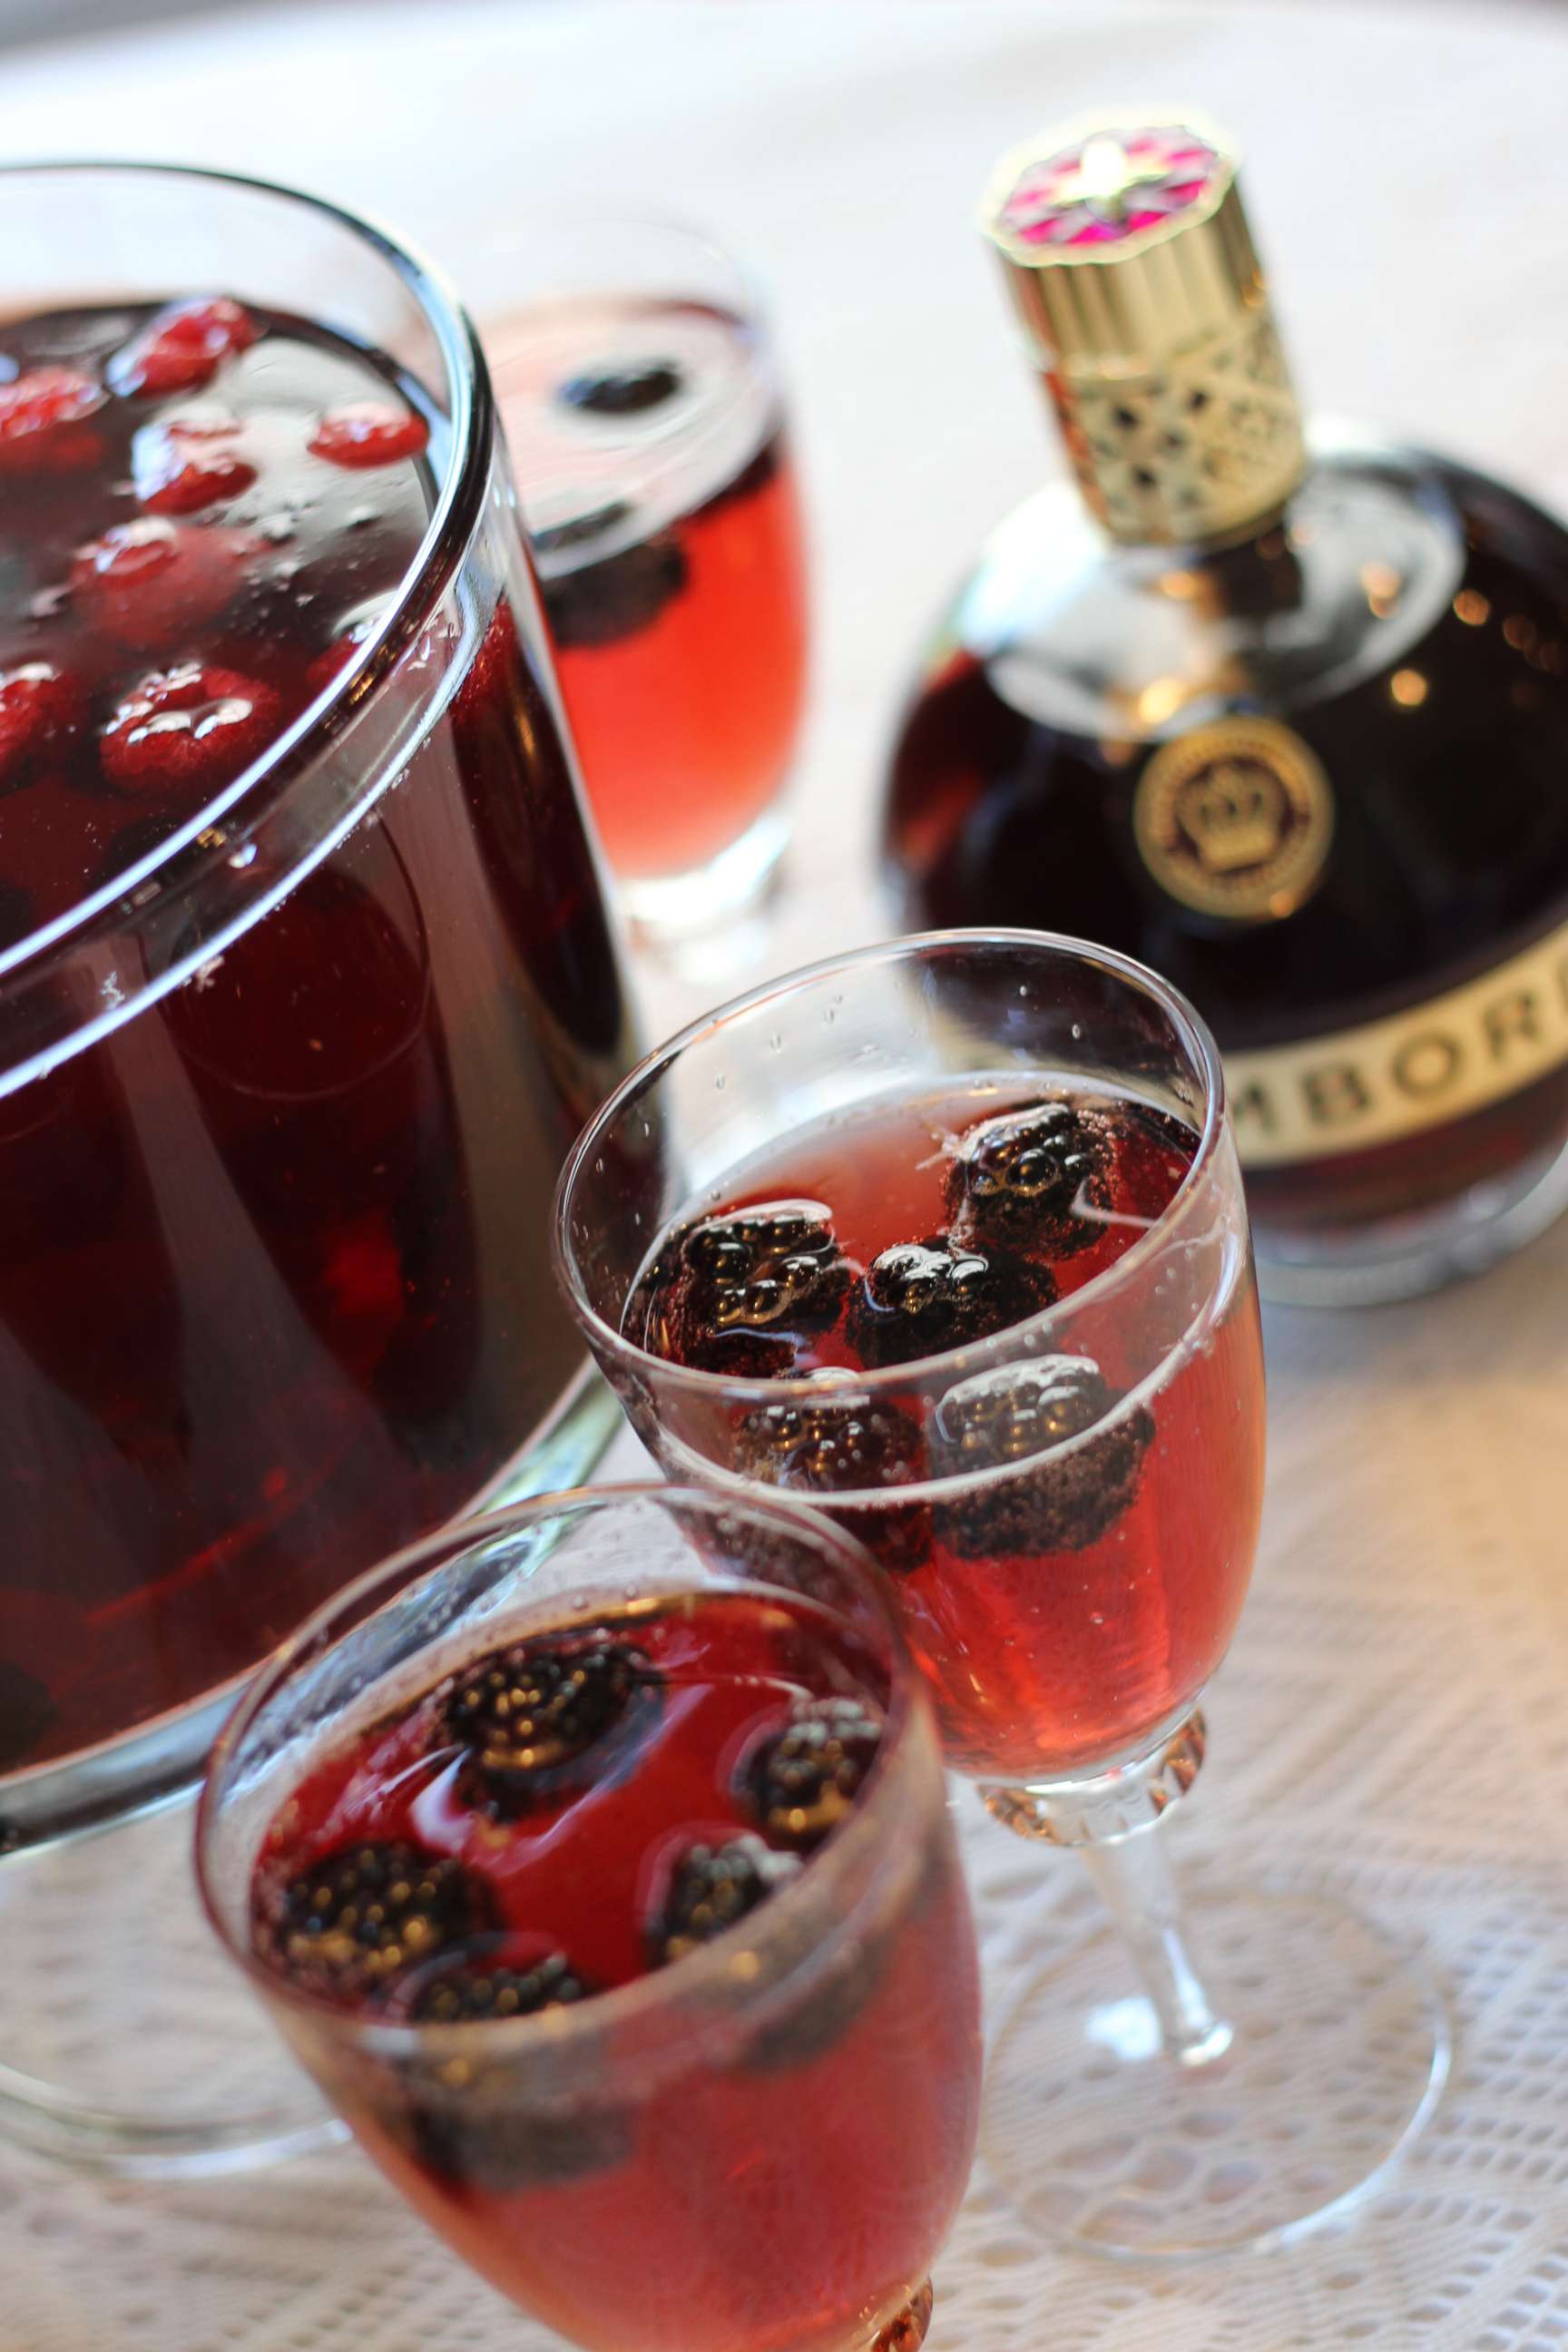 PHOTO: A sparkling Chambord and champagne cocktail with raspberries and blackberries.